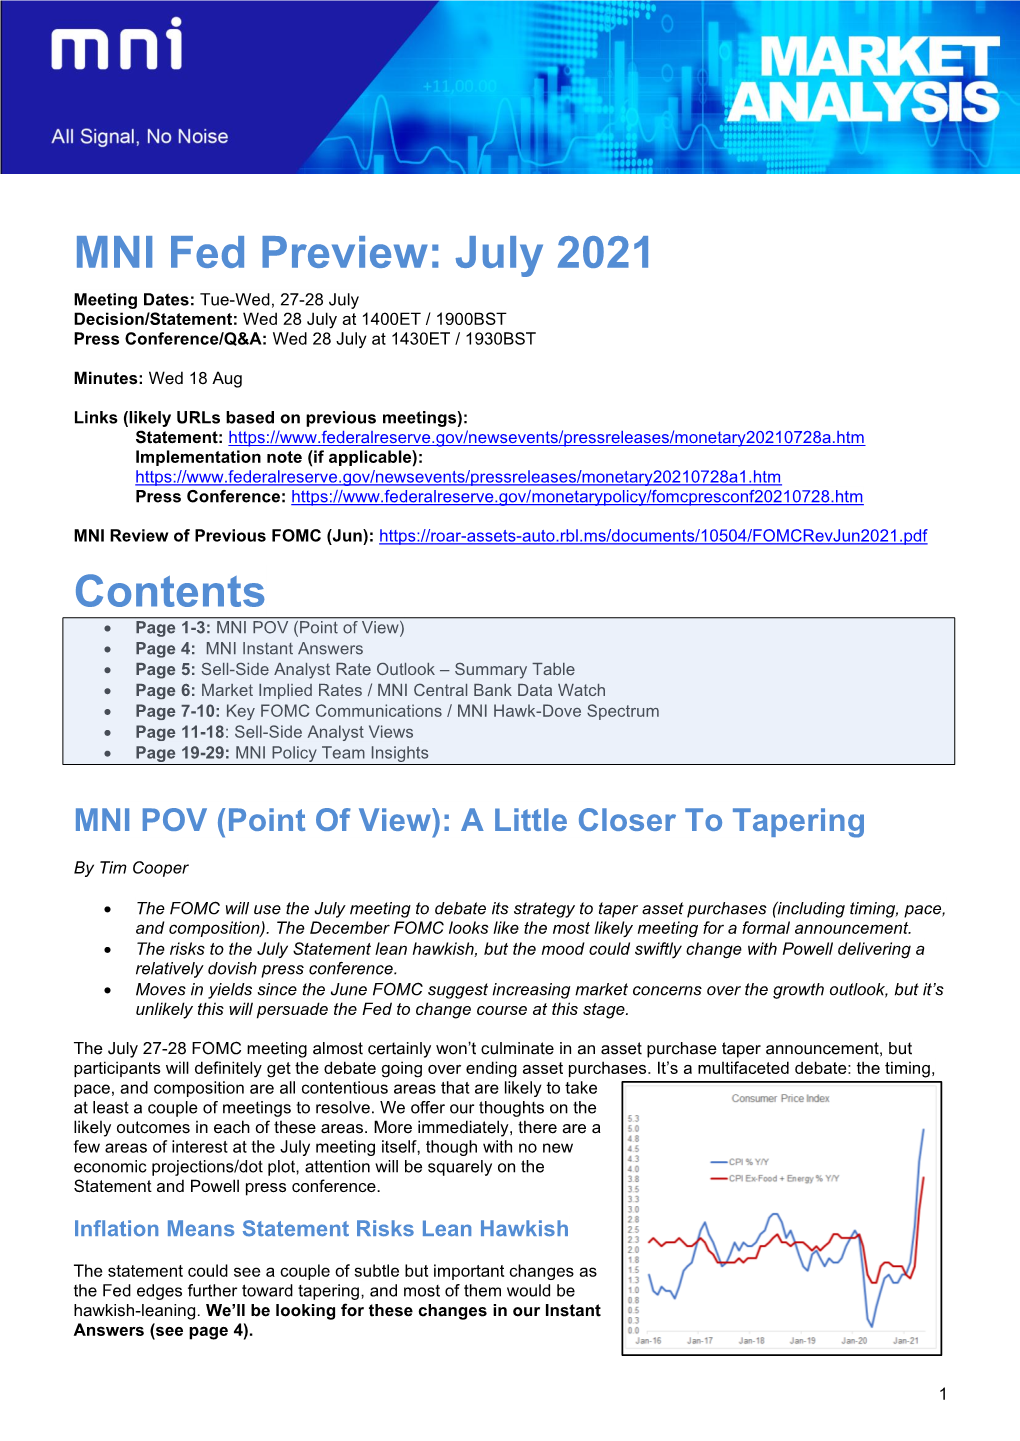 MNI Fed Preview: July 2021 Contents